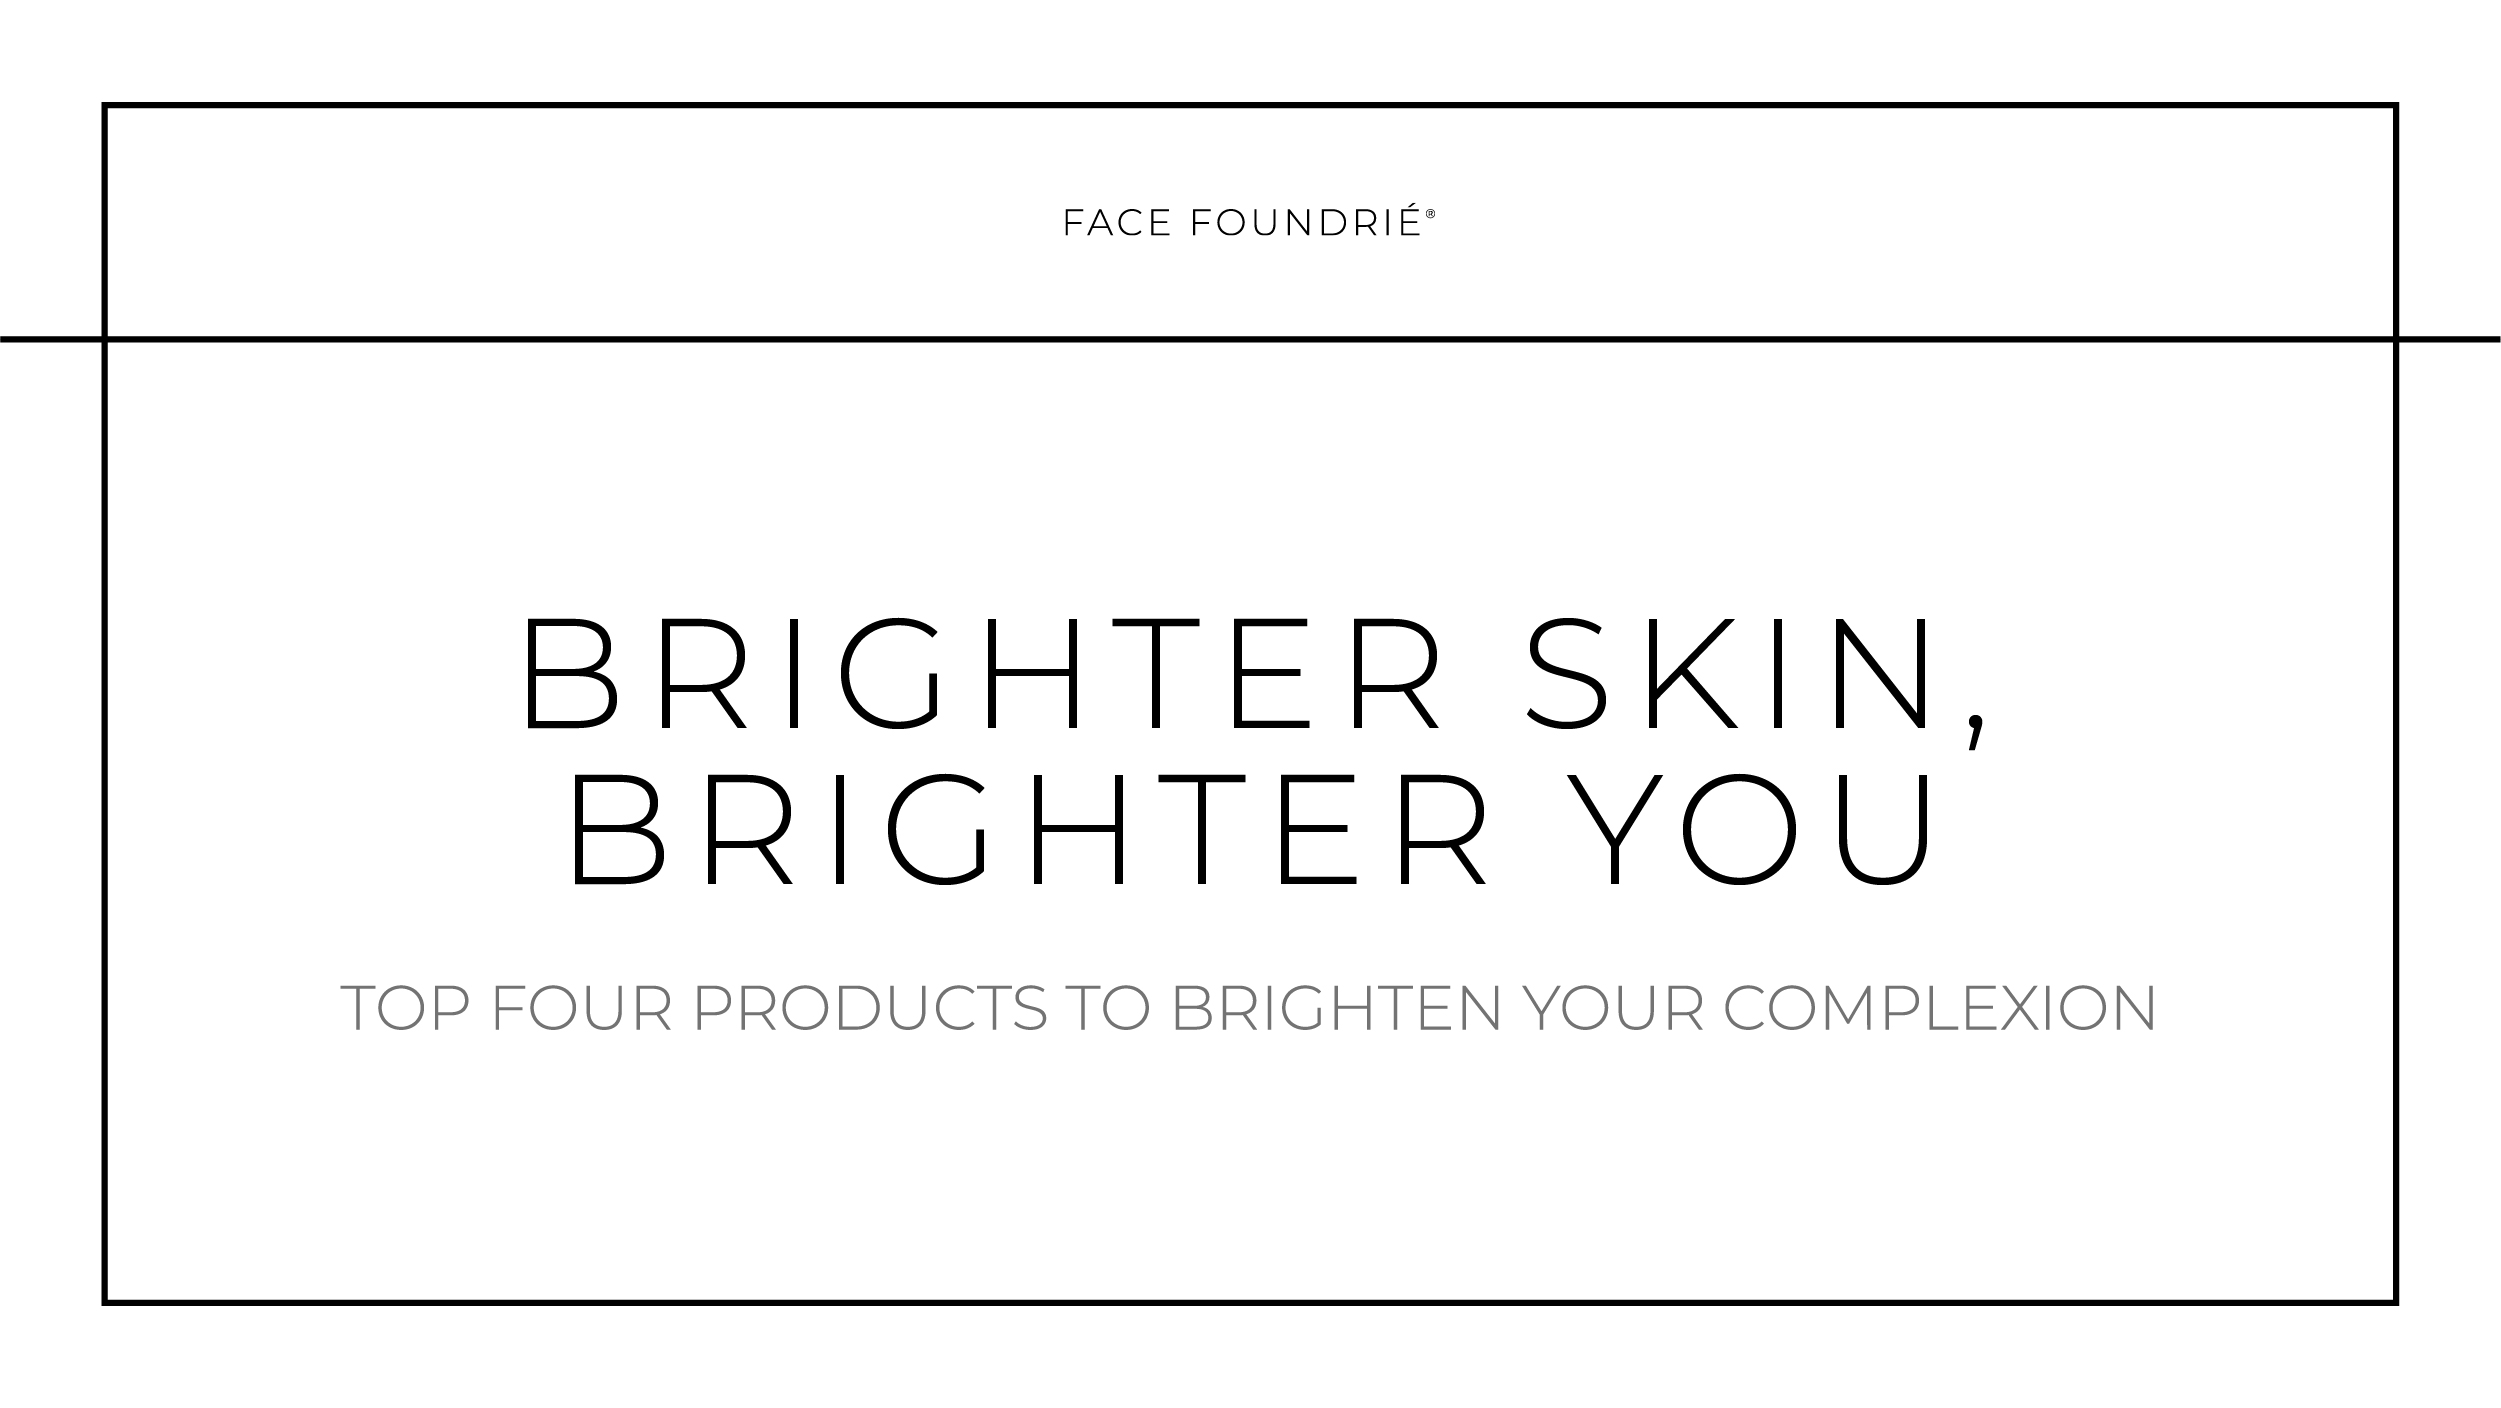 Top 4 Products for Brighter Skin